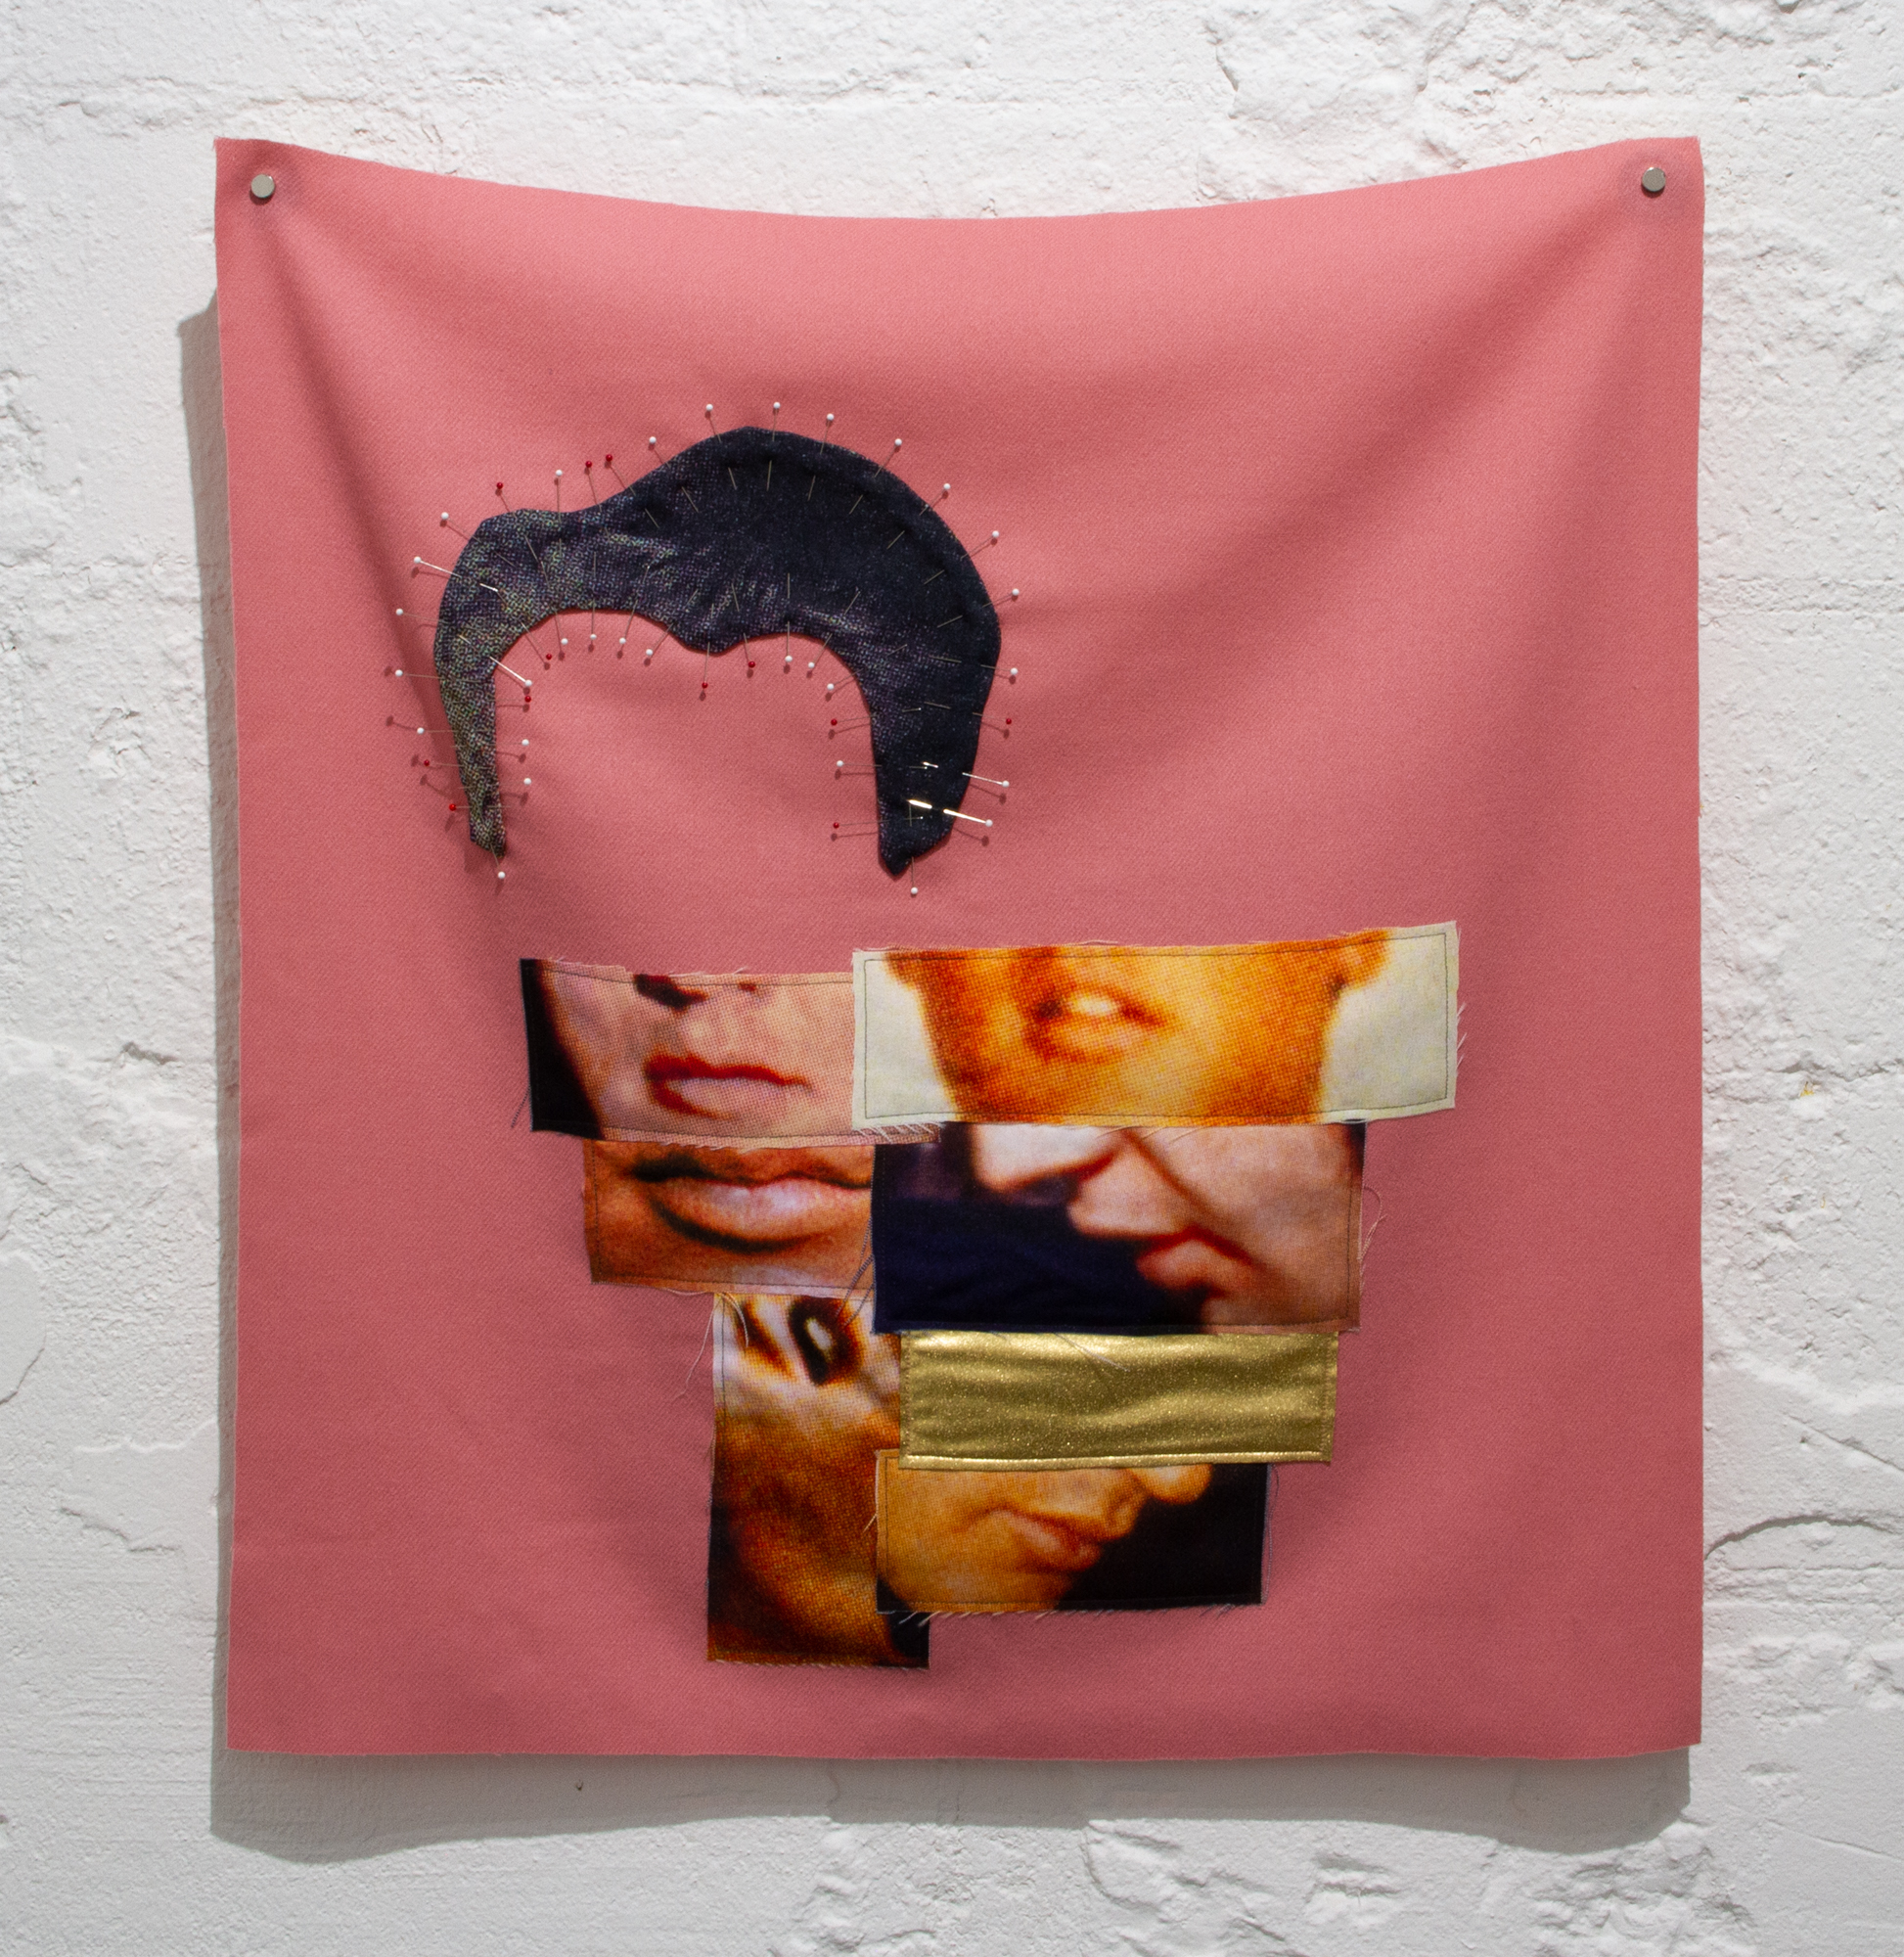  Bean Gilsdorf,  Golden Boy , 2017, Fabric collage with wool, polyester, lycra, pins, 26 x 24 in. 